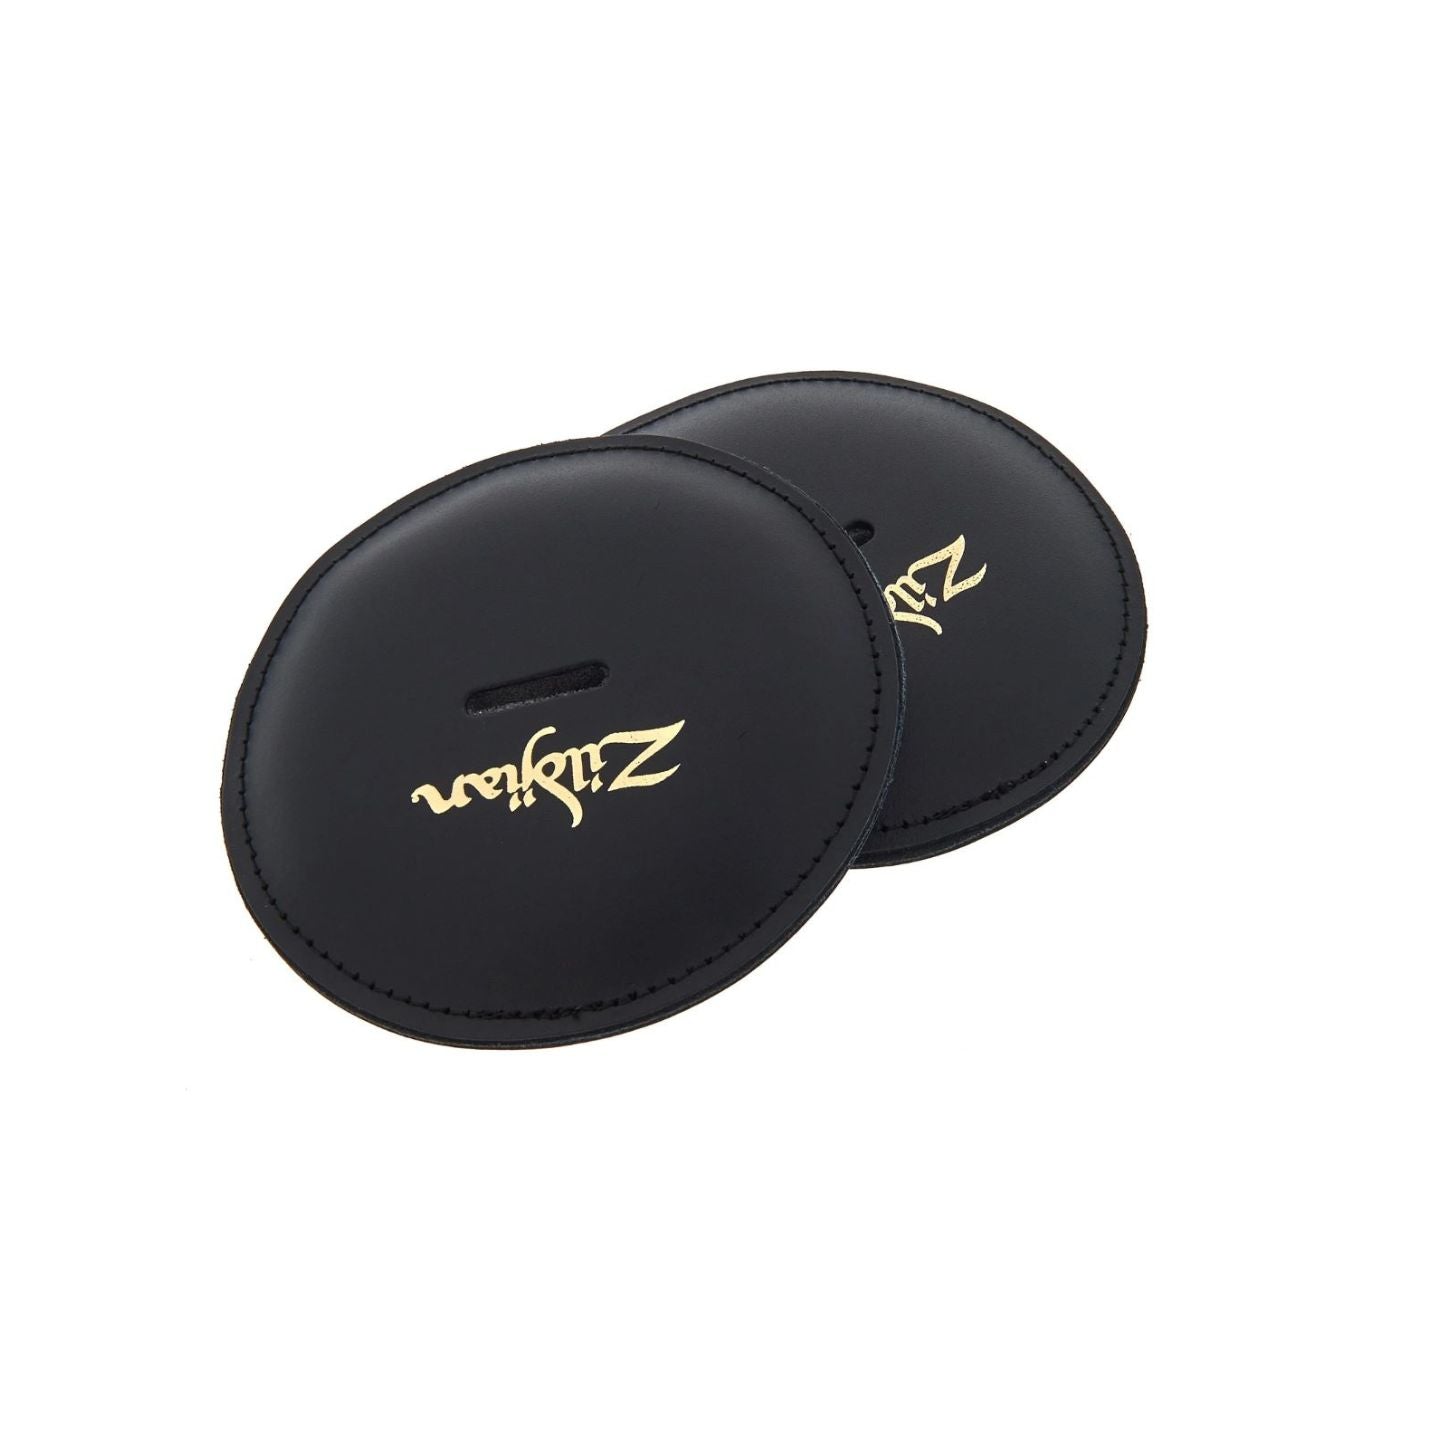 Zildjian Concert and Marching Band Genuine Leather Pads Cymbal Drum Accessory Protective Casing | P0751